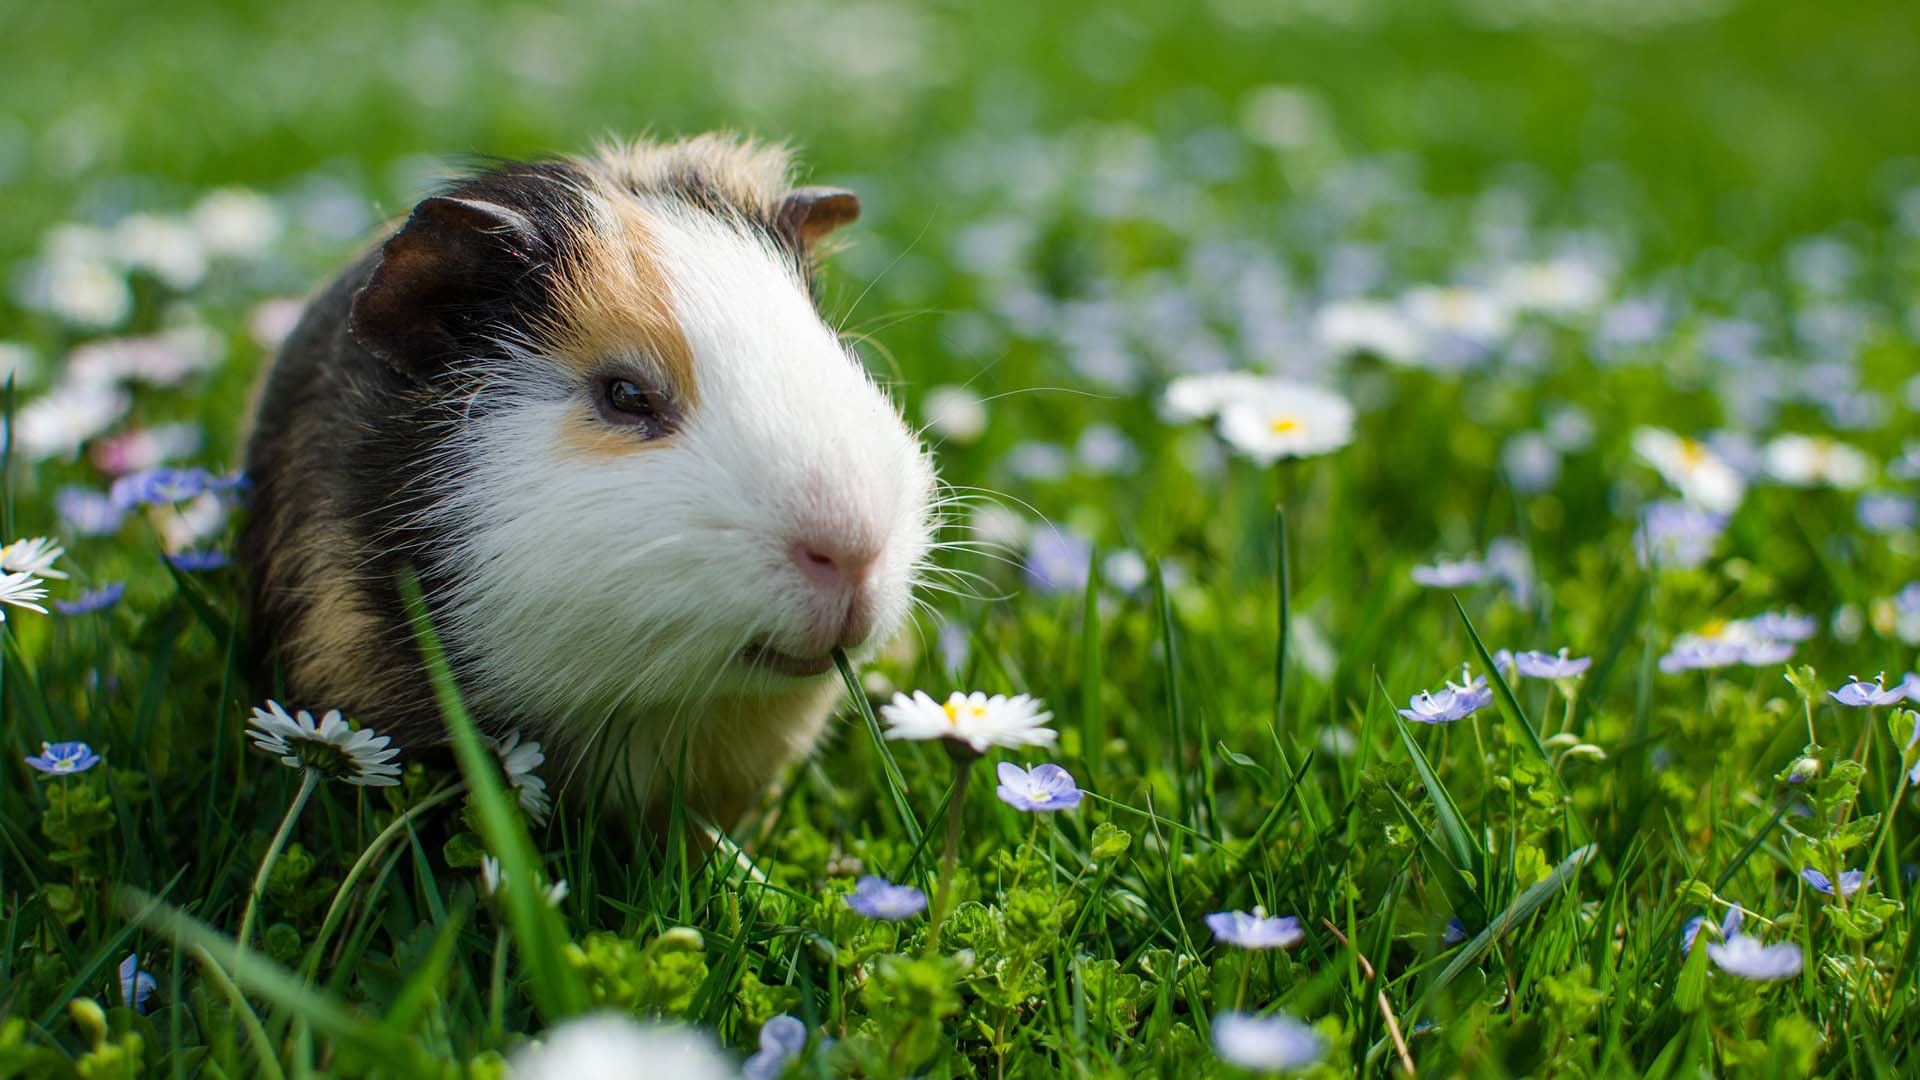 A tricolour guinea pig on natural daisy-filled grass